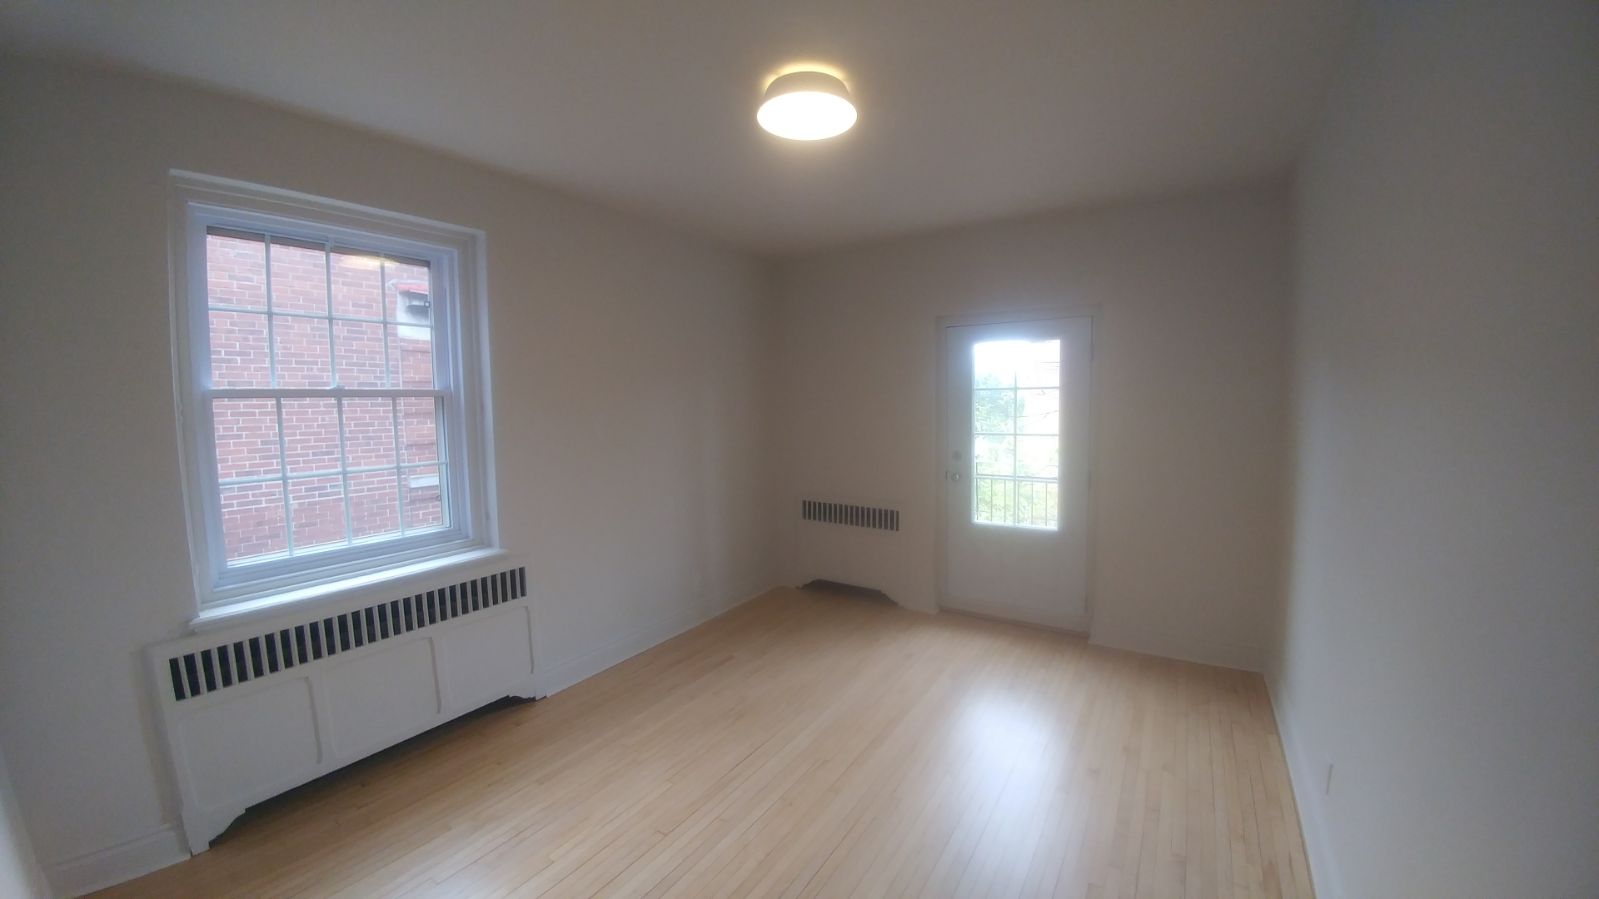 2 bedroom Apartments for rent in Hampstead at 1-2 Ellerdale - Photo 03 - RentQuebecApartments – L9523